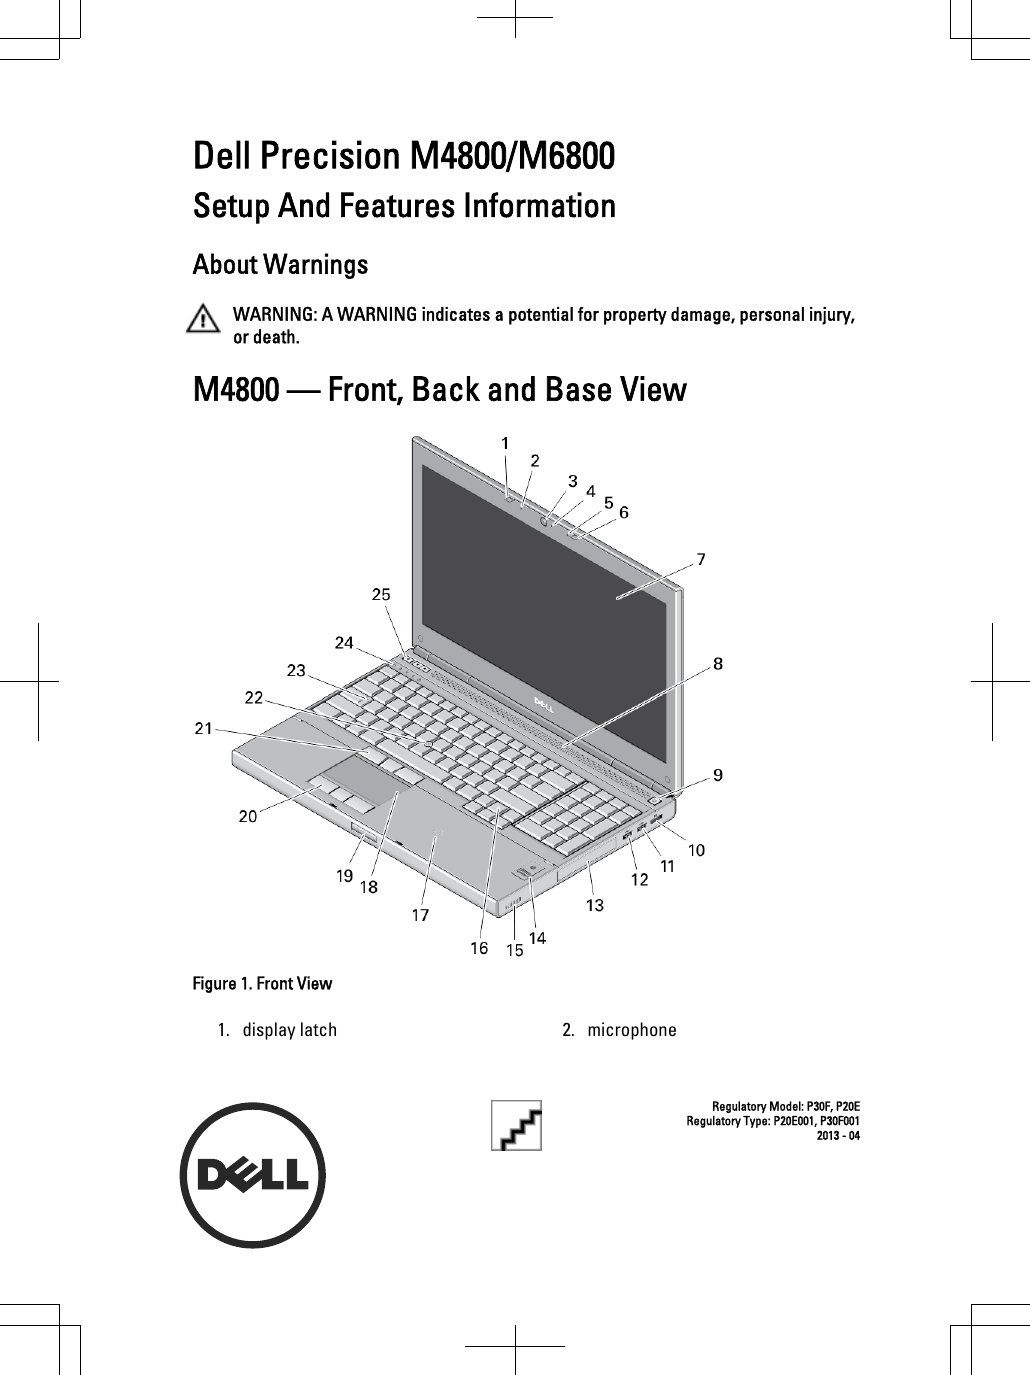 Dell Precision M4800/M6800 Setup And Features InformationAbout WarningsWARNING: A WARNING indicates a potential for property damage, personal injury, or death.M4800 — Front, Back and Base ViewFigure 1. Front View1. display latch  2. microphoneRegulatory Model: P30F, P20ERegulatory Type: P20E001, P30F0012013 - 04